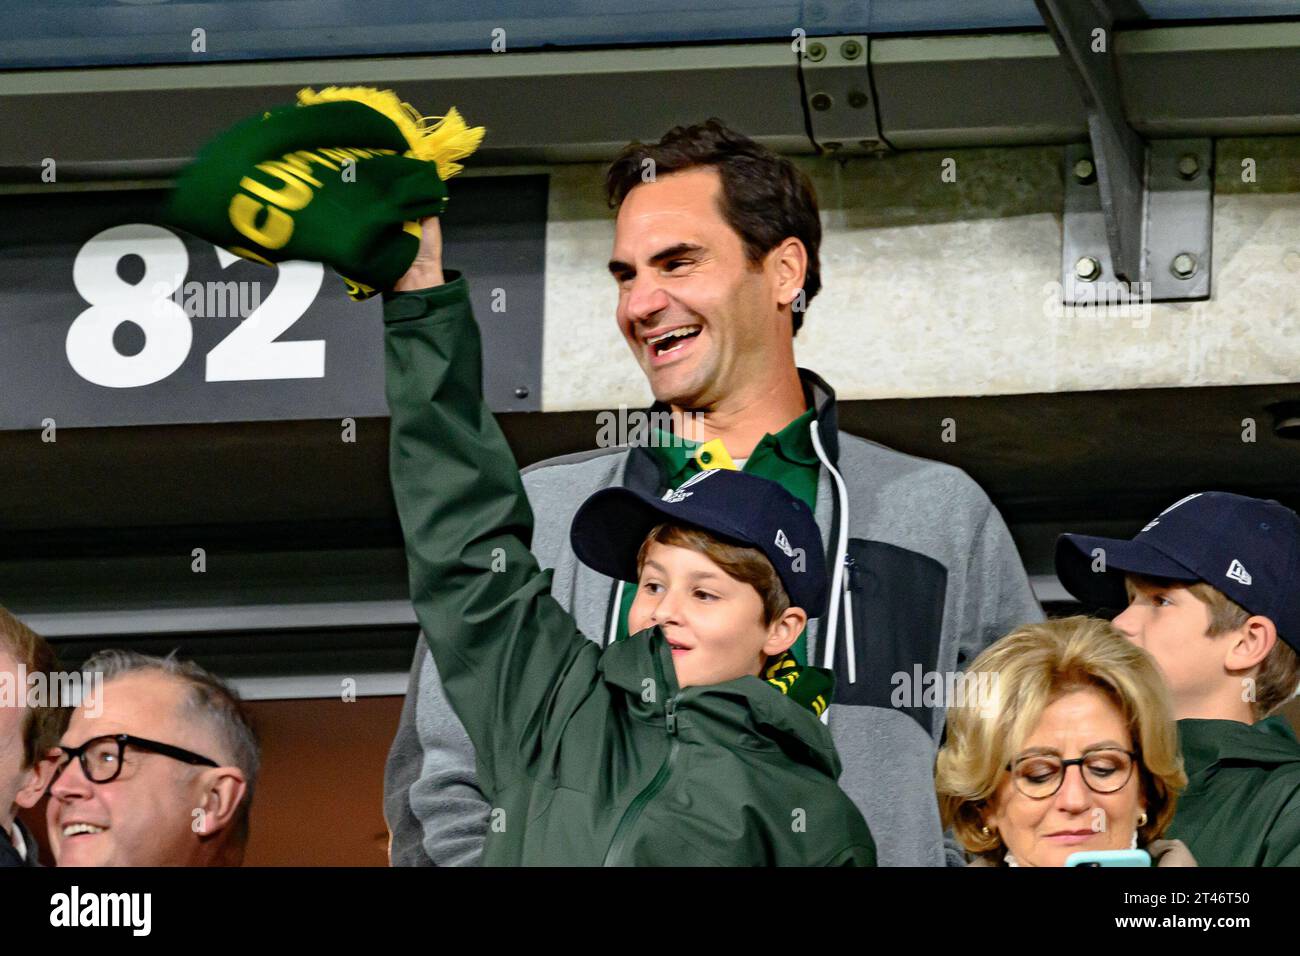 Paris, France. 28th Oct, 2023. Lynette Federer (Roger's mother who is from South Africa), above Roger Federer, Mirka Federer with their kids Leo, Lenny, Myla Rose, Charlene Riva attend the Rugby World Cup France 2023 Final between New Zealand (All Blacks) and South Africa (Springboks) at Stade de France on October 28, 2023 in Saint-Denis near Paris, France. Photo by Laurent Zabulon/ABACAPRESS.COM Credit: Abaca Press/Alamy Live News Stock Photo